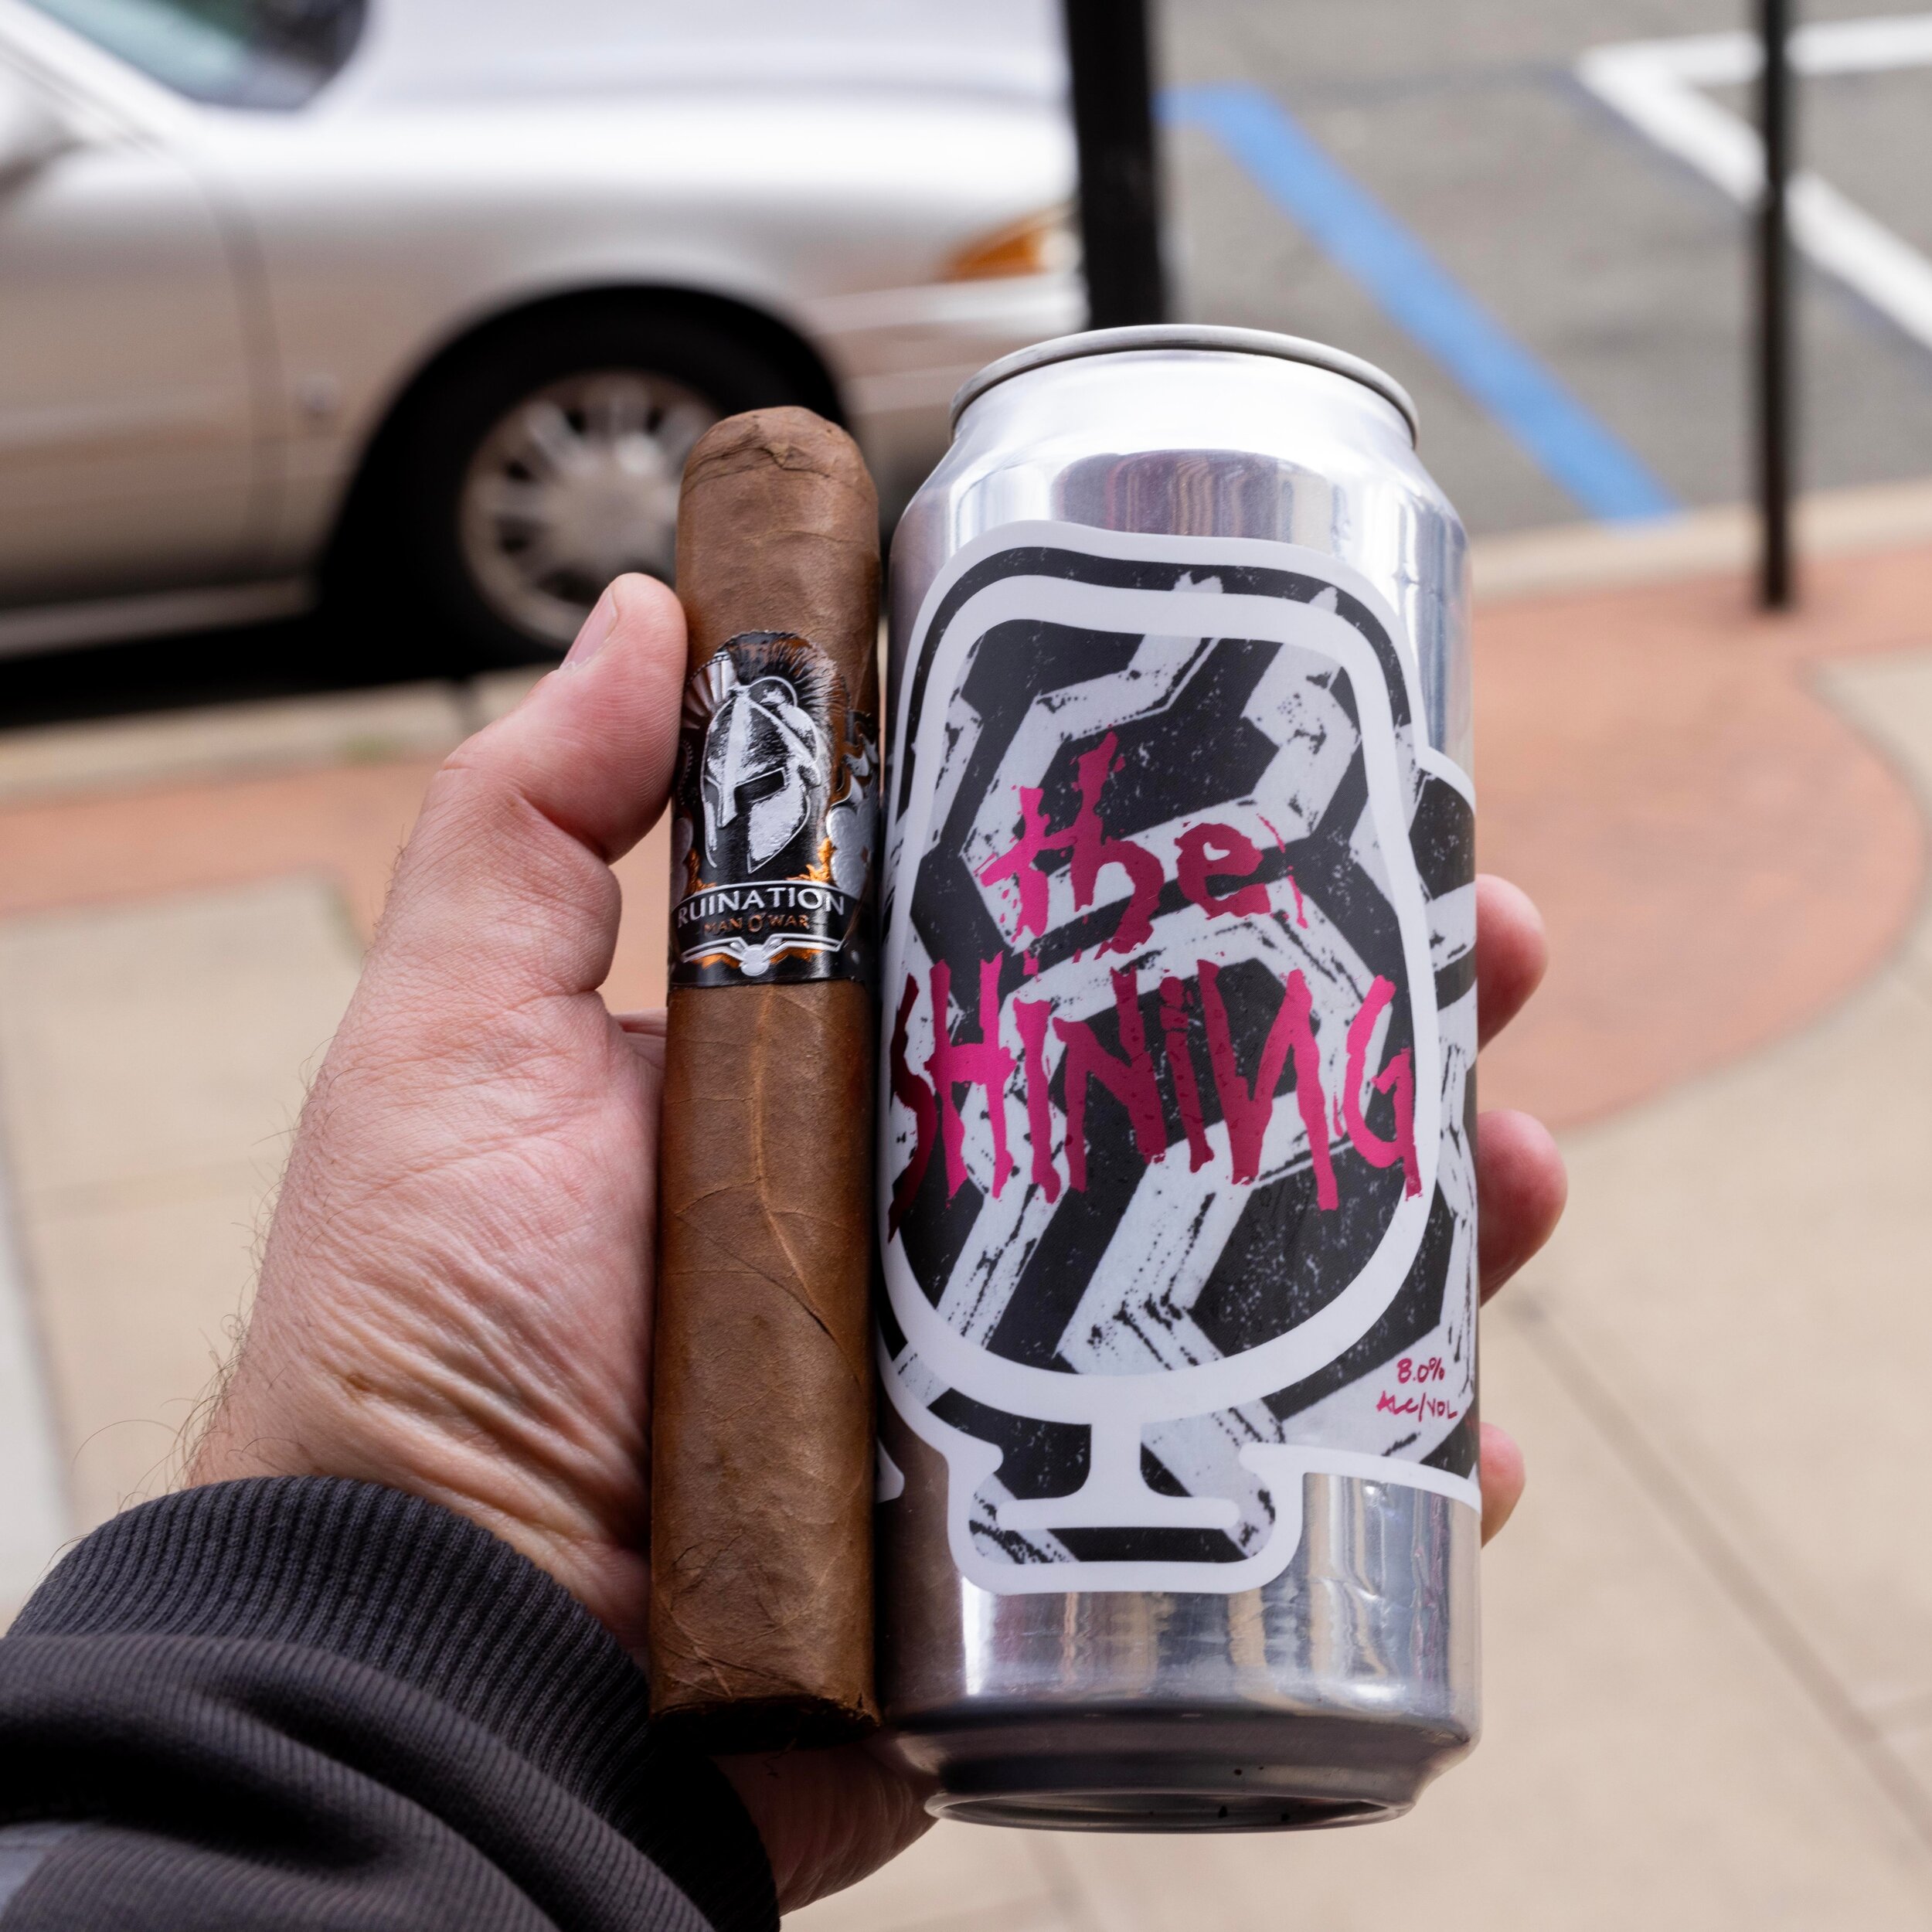 The Shining: Foam Brewers&rsquo; Tribute to Both Horror Movies and Hop Overdoses

Cigar: Man O&rsquo; War Ruination Robusto No. 2